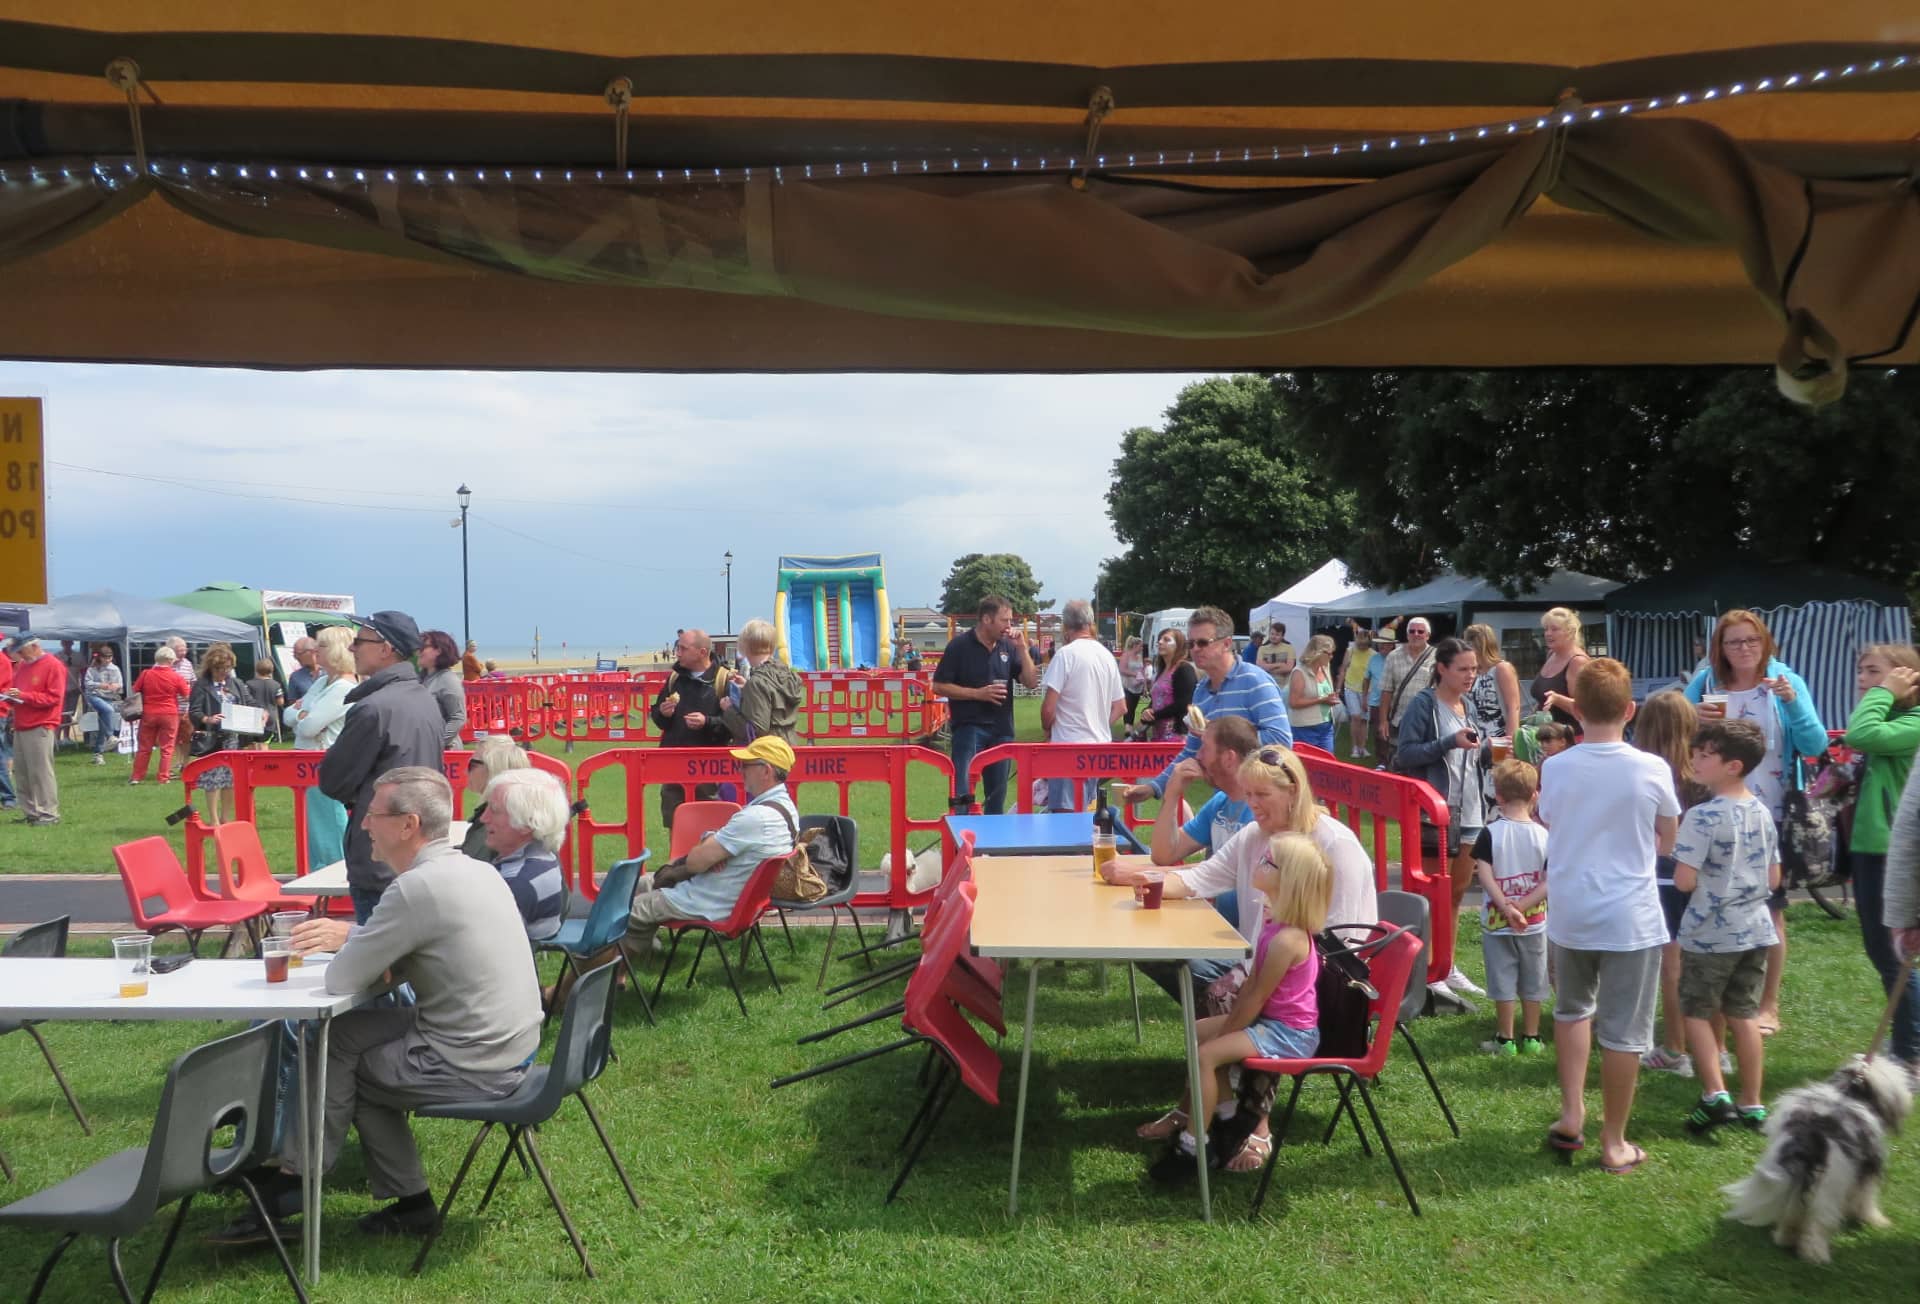 Party on the Green returns to Ryde later this month